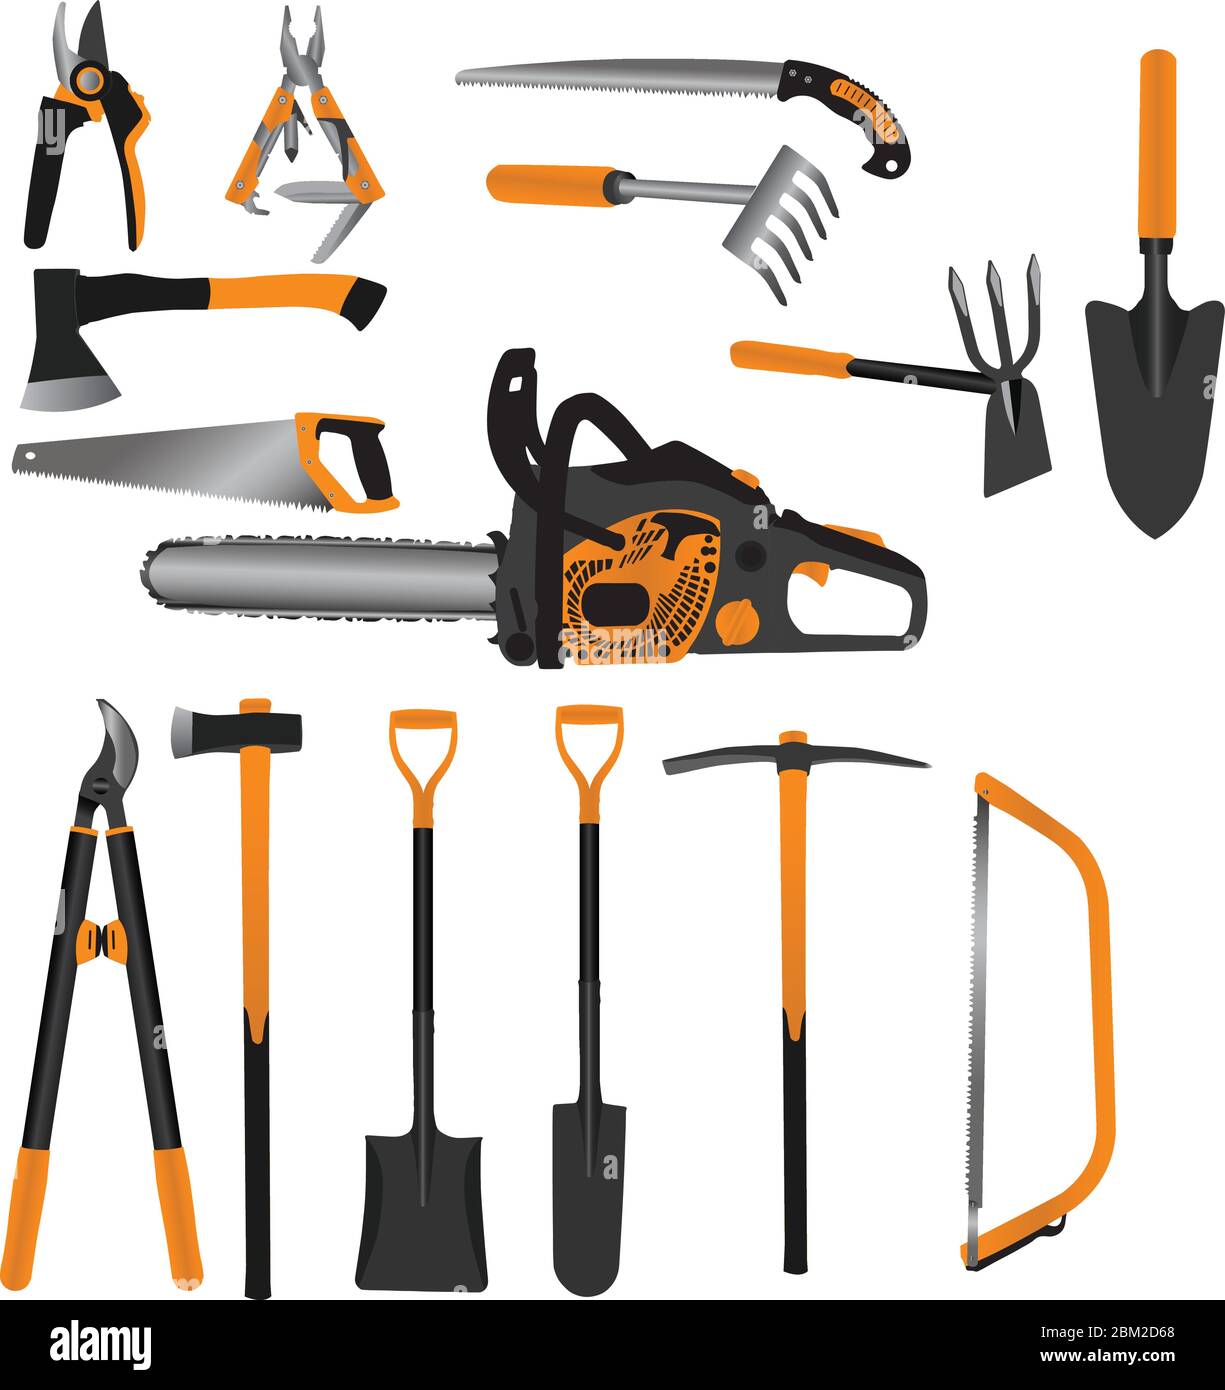 Gardening handle tools set including chainsaw, handsaws, scissors, ax hatchet, spade, rake, pickax and multifunction tools collection Stock Vector